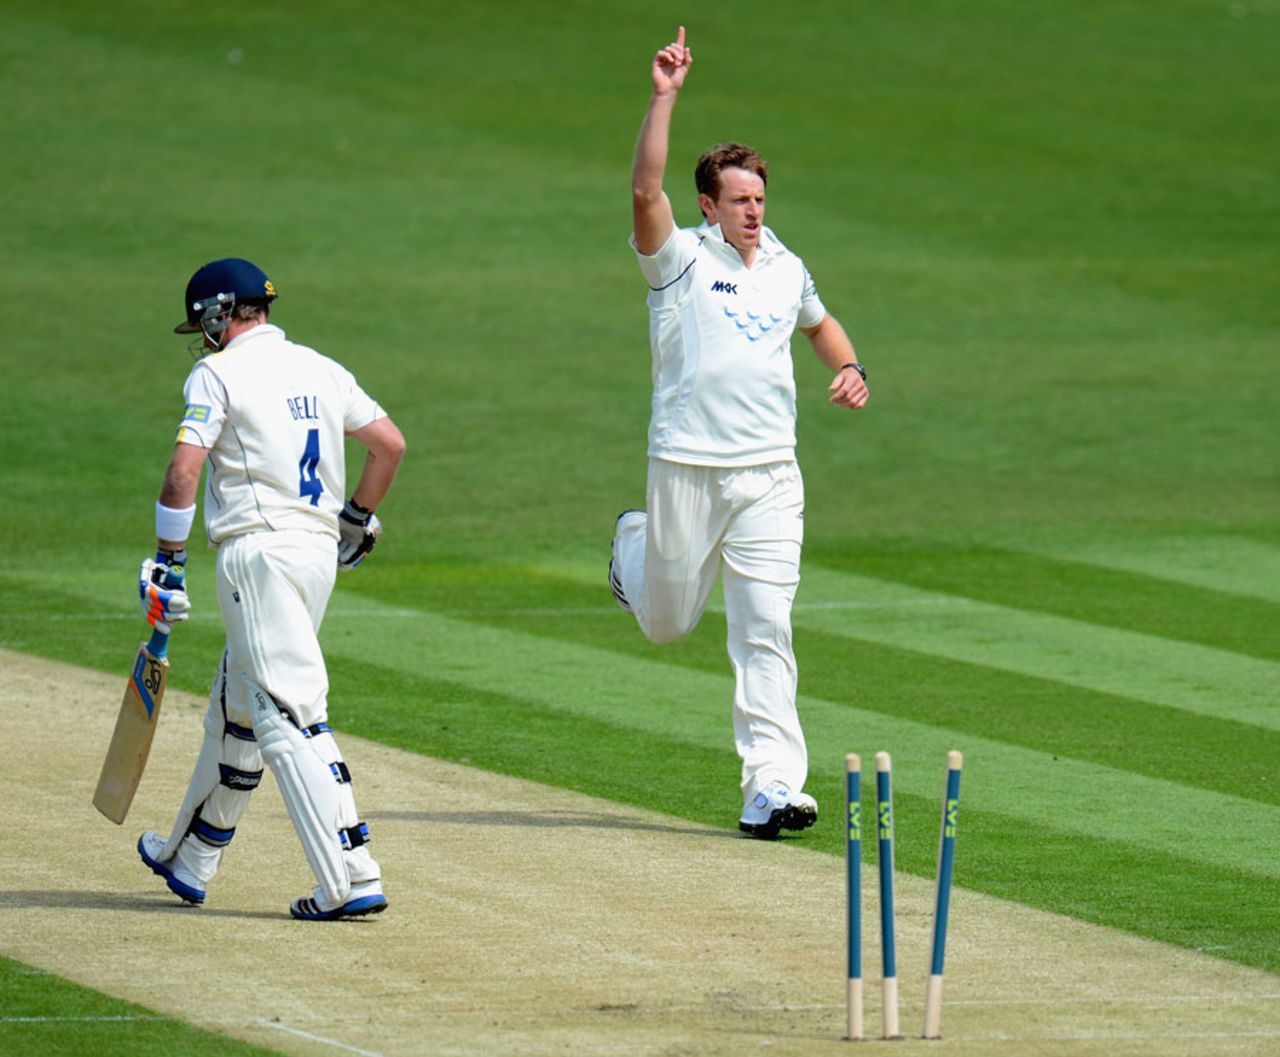 James Anyon celebrates after bowling Ian Bell, Sussex v Warwickshire, County Championship, Division One, Hove, April 26, 2012